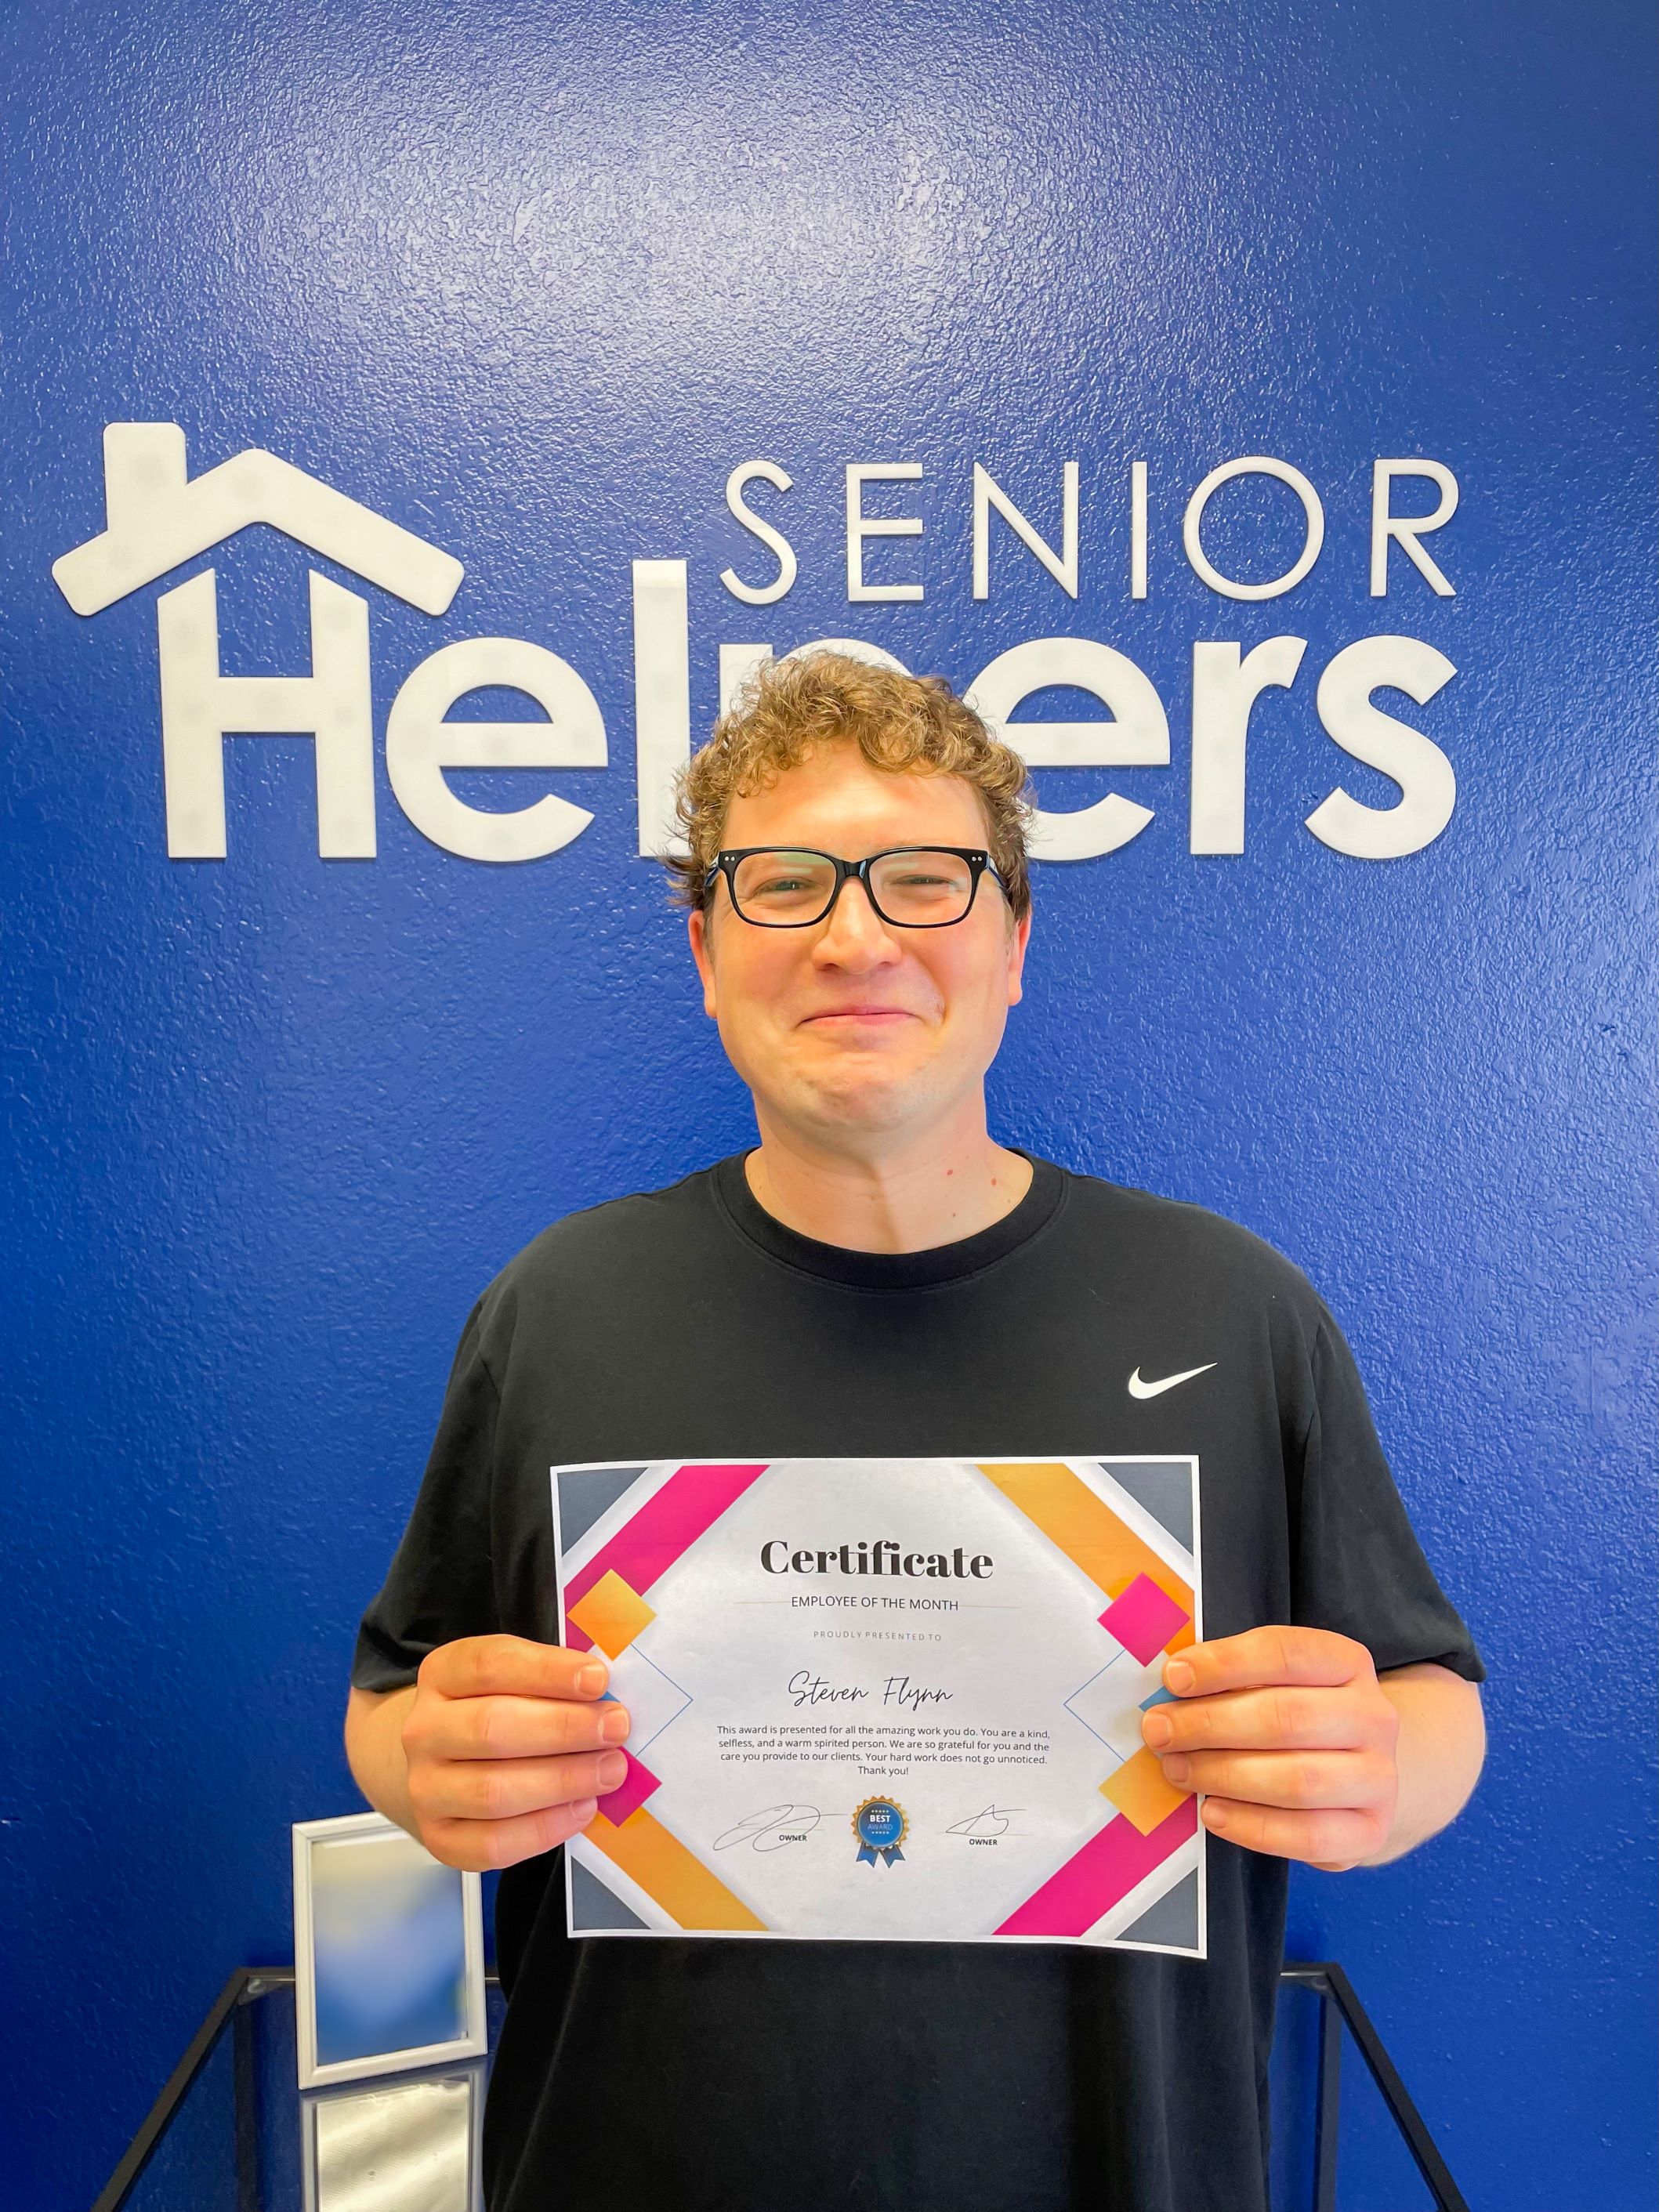 Congratulations to our Caregiver of the Month, Steven! We appreciate your attention to detail and ability to update families through the family portal. You are able to talk battleships with one family and go shopping with others. We want to thank you for your flexibility and care you provide to the families you support.